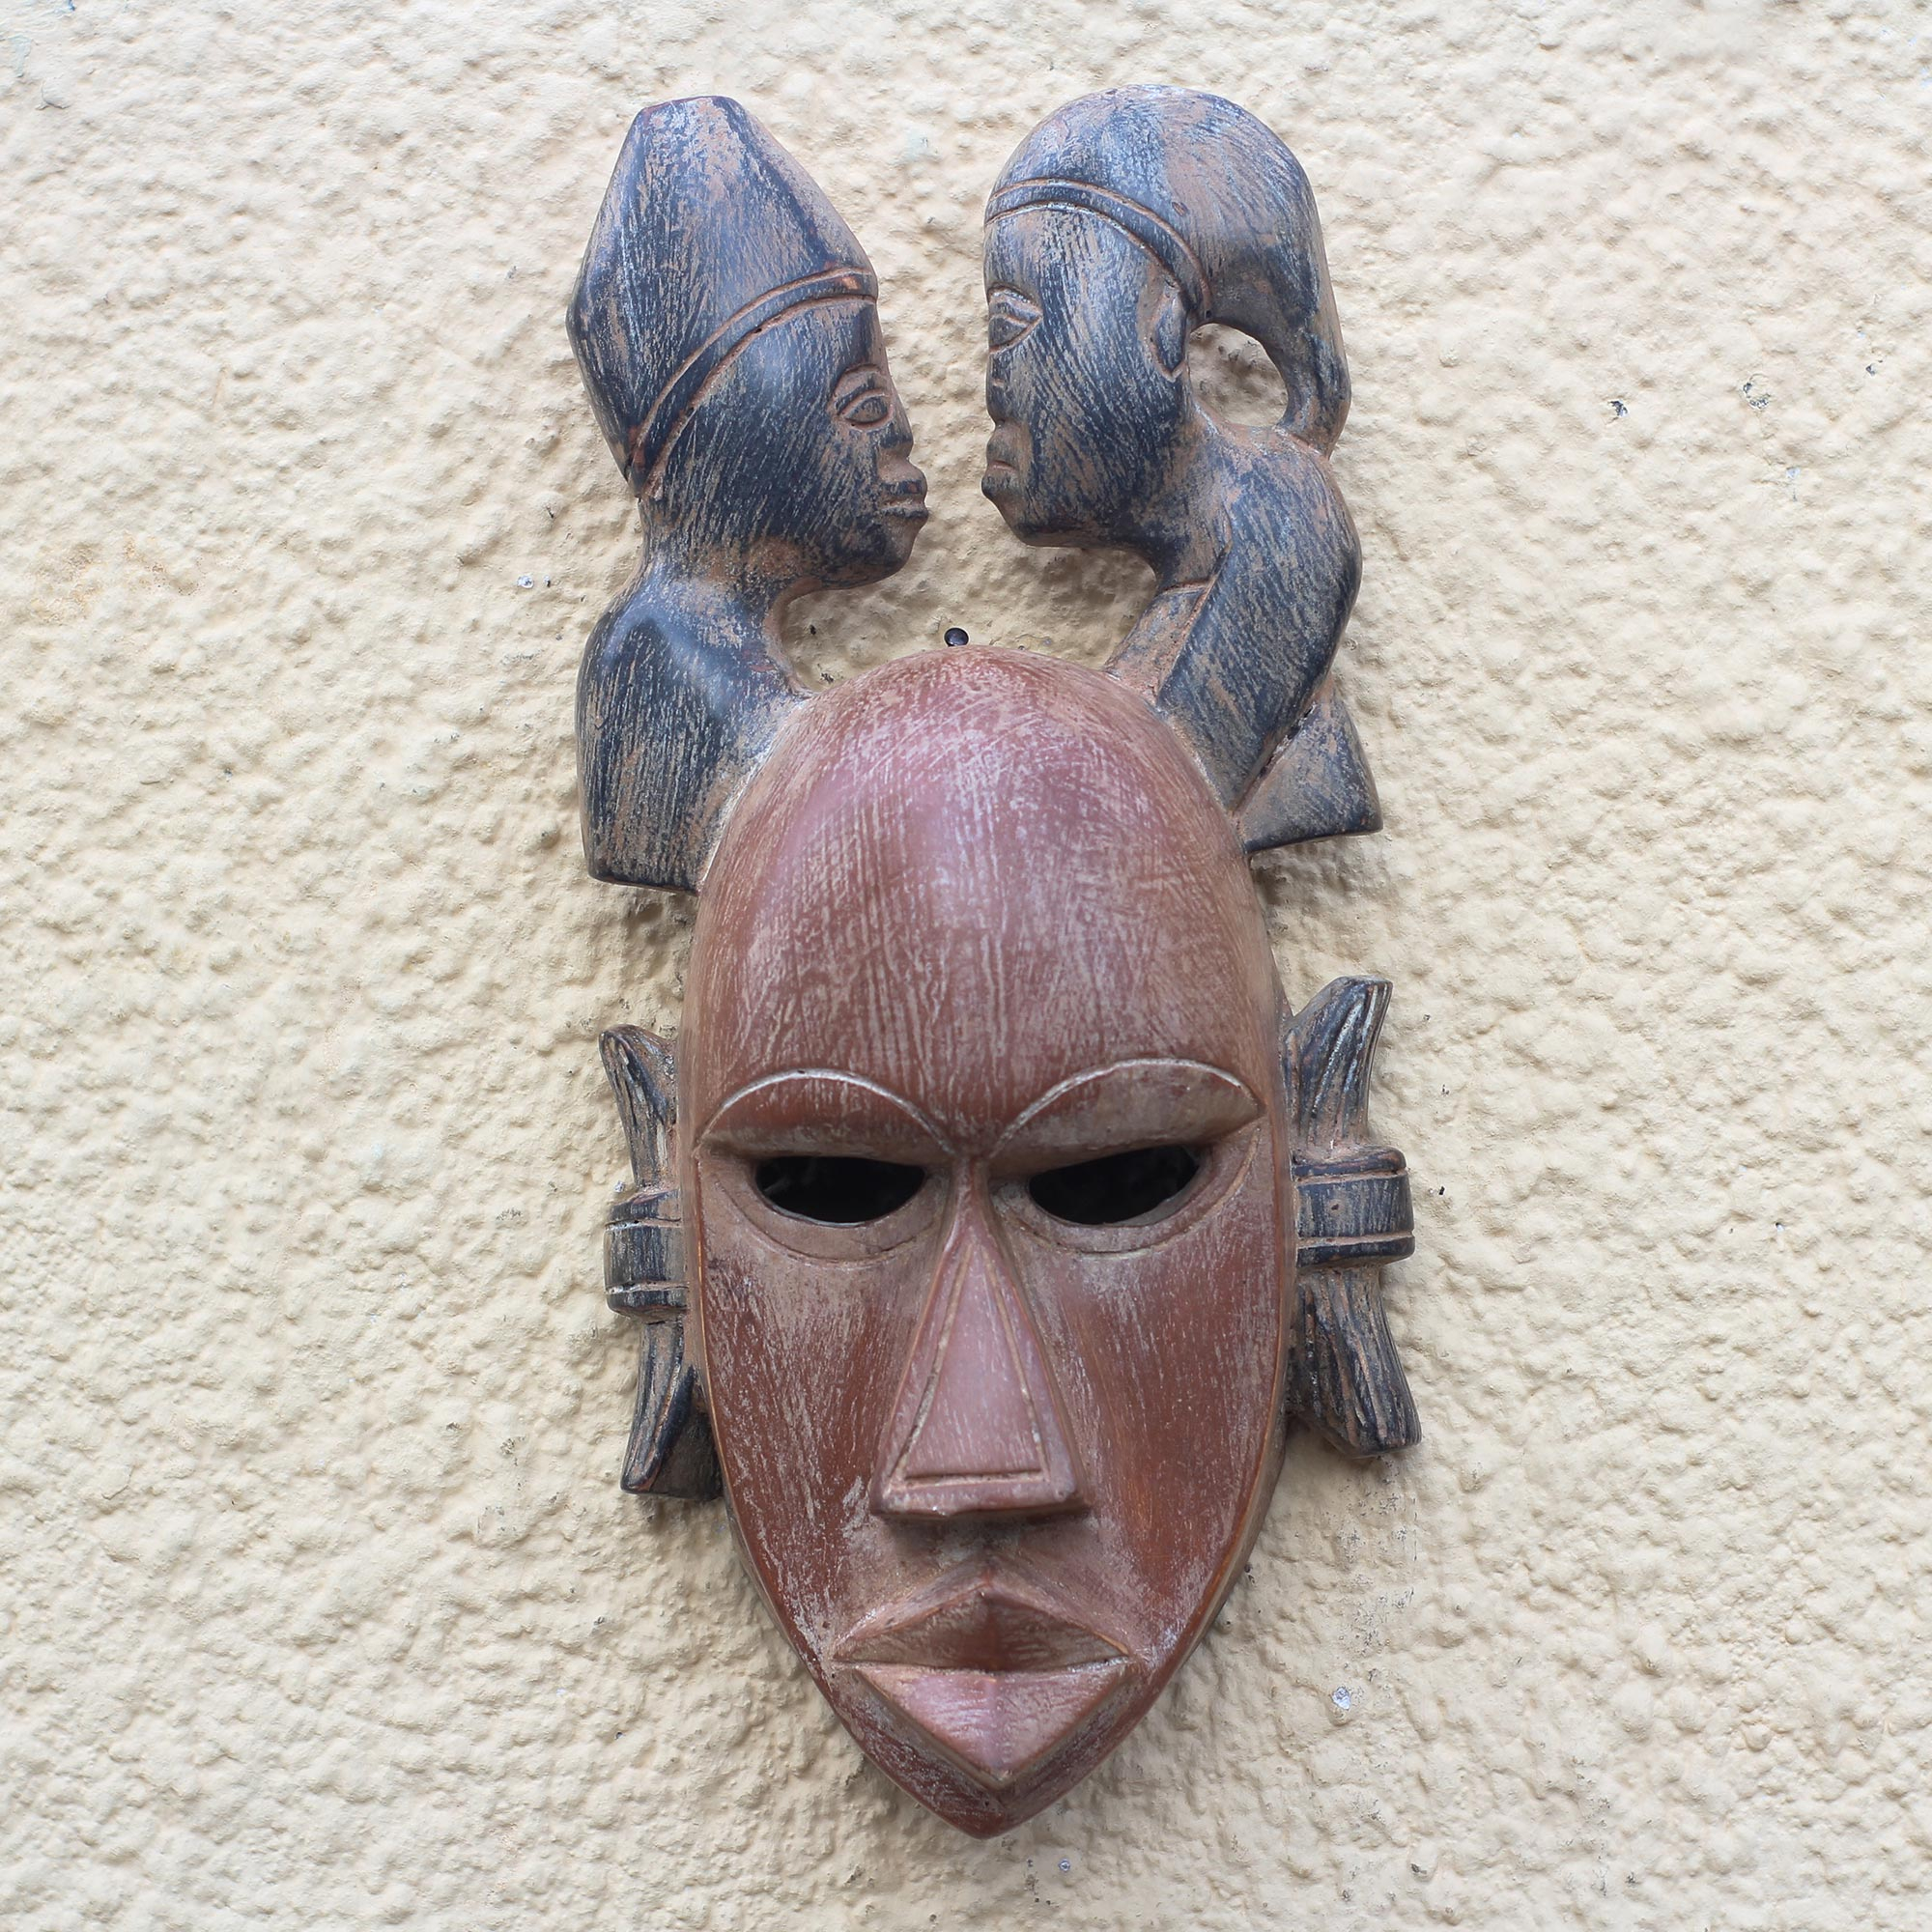 african tribe mask cut out